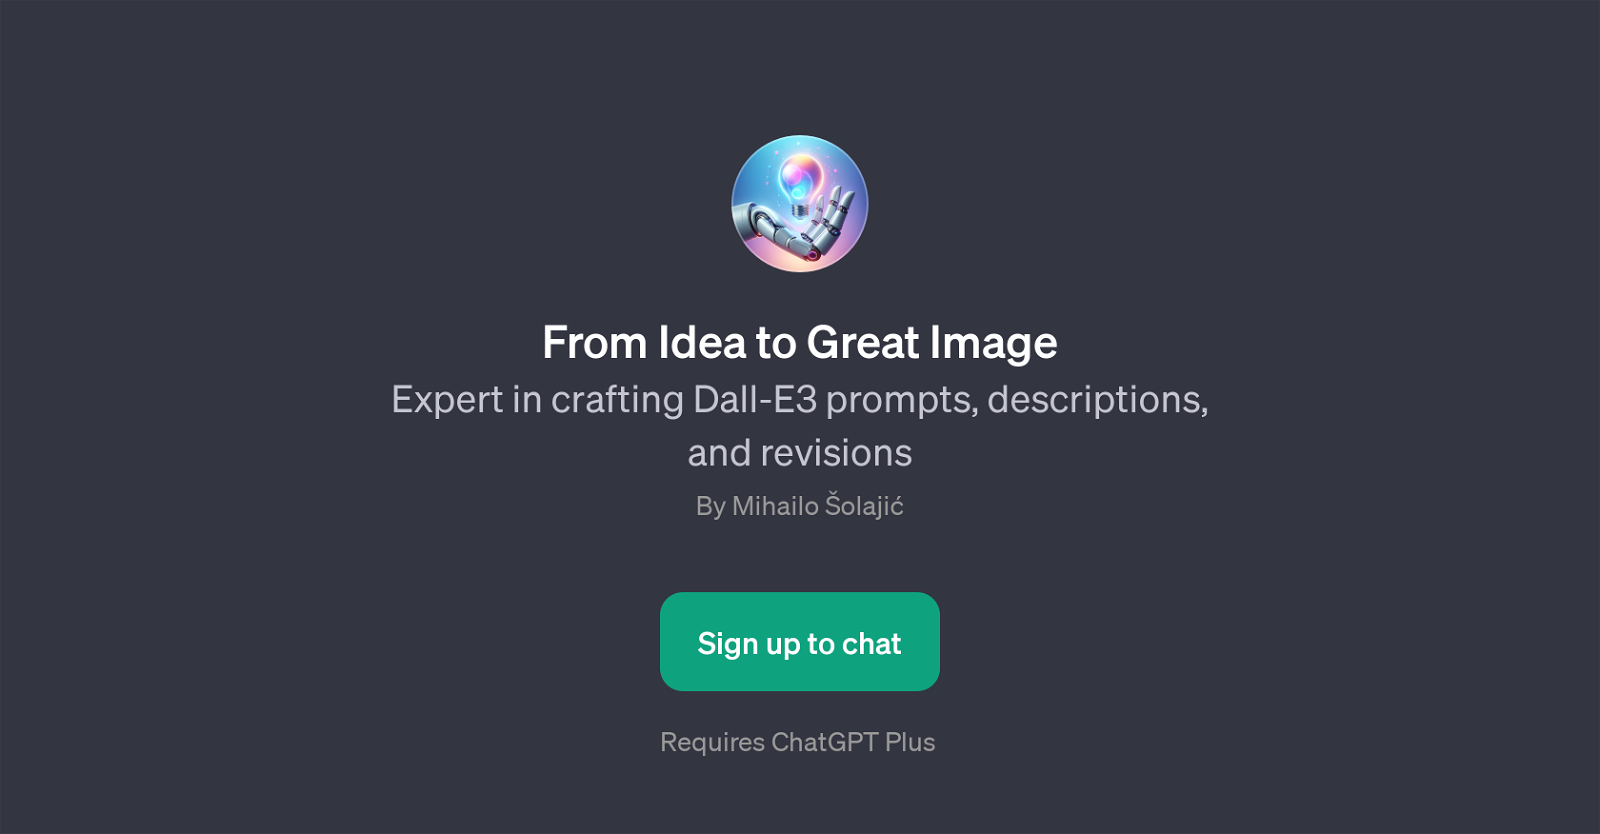 From Idea to Great Image website